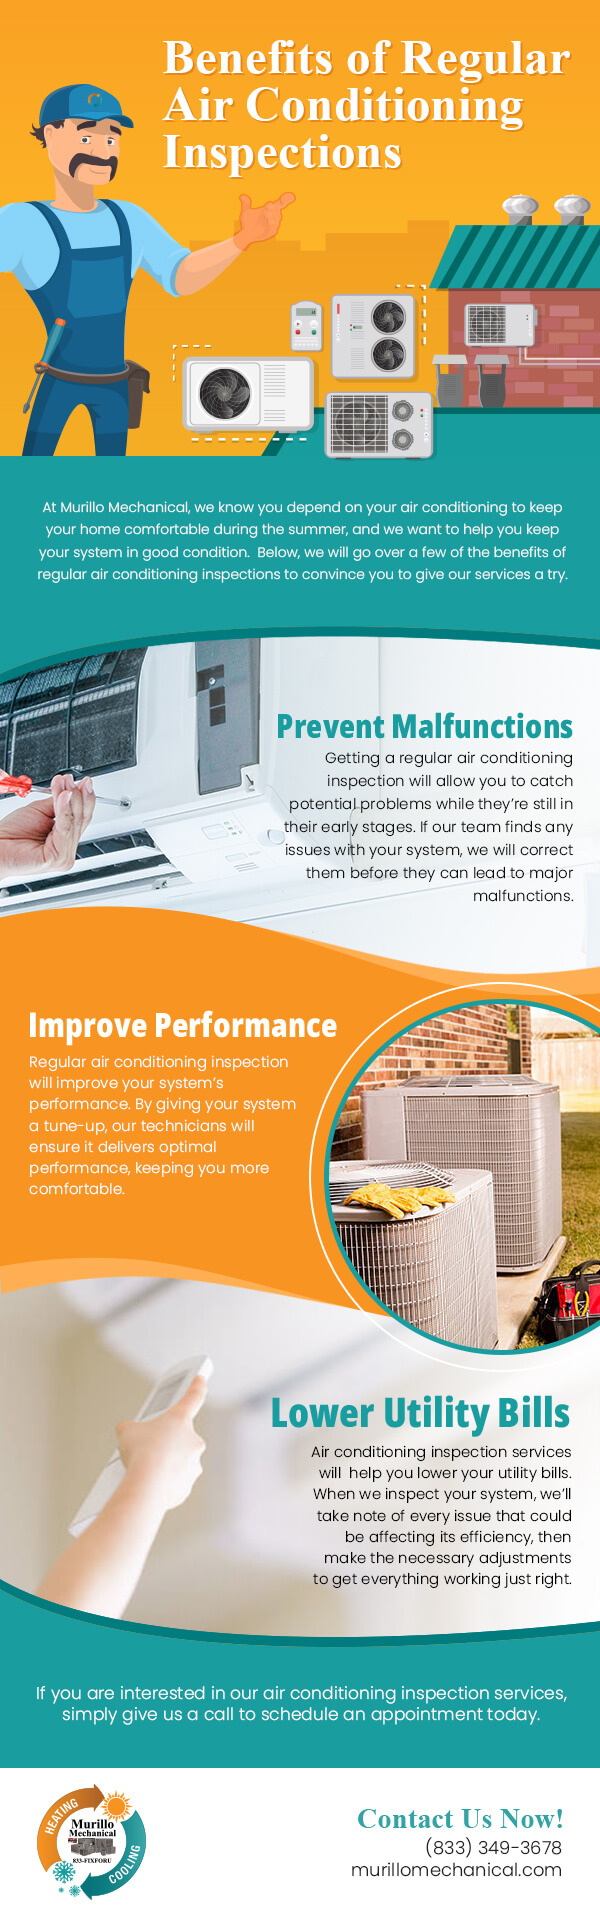 Benefits of Regular Air Conditioning Inspections